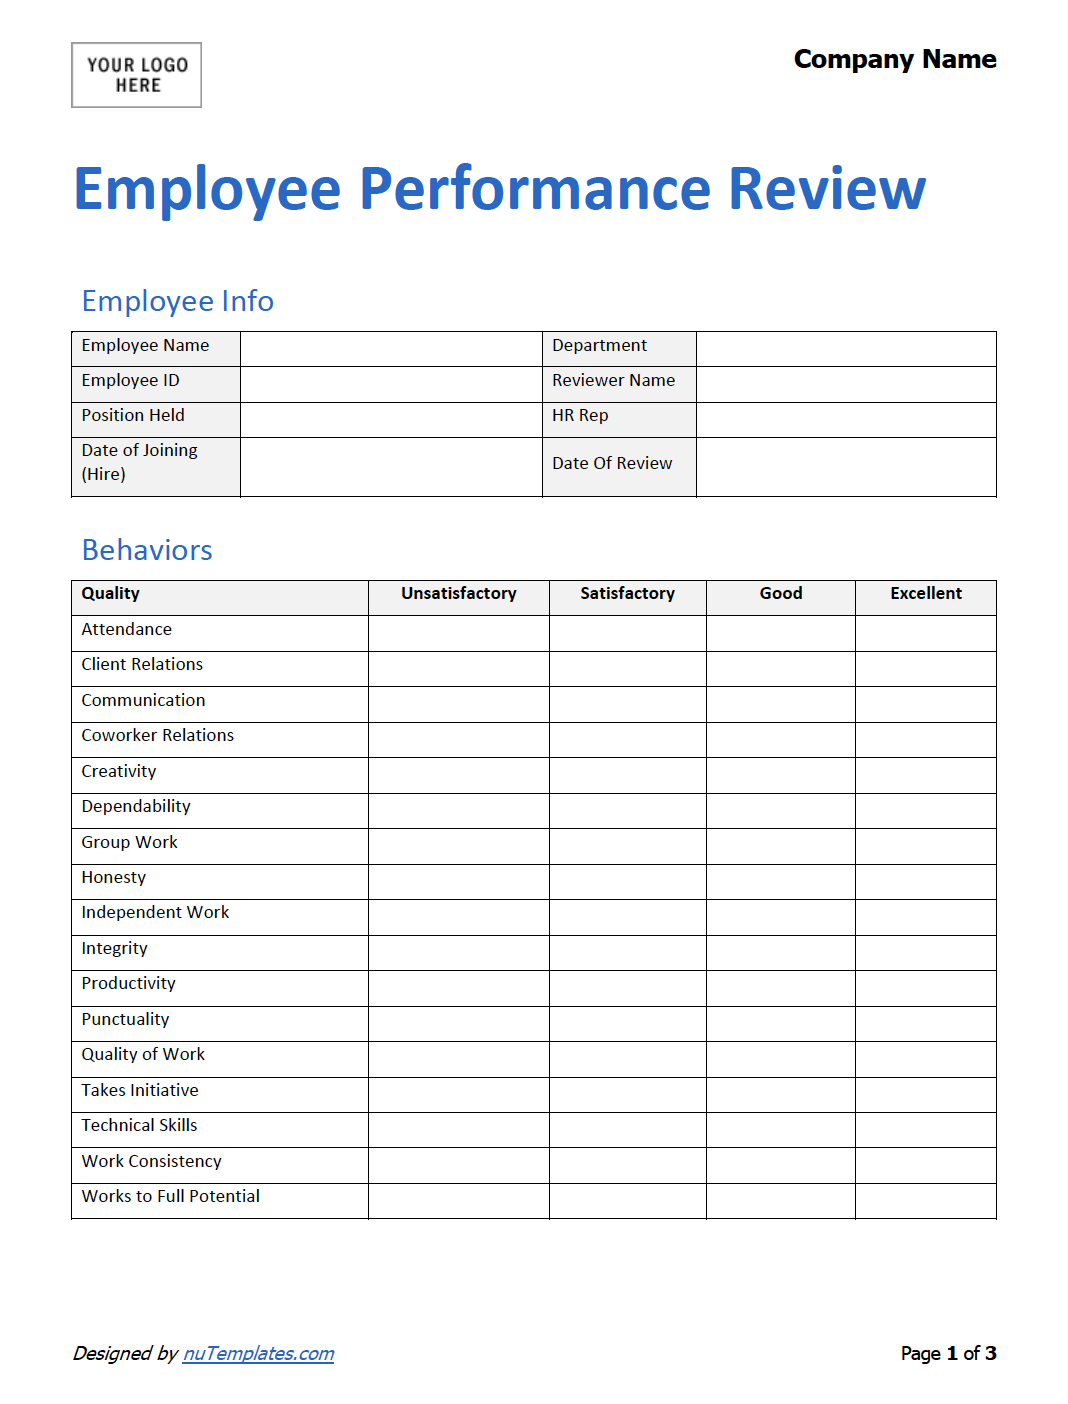 22-printable-employee-performance-evaluation-form-excel-templates-images